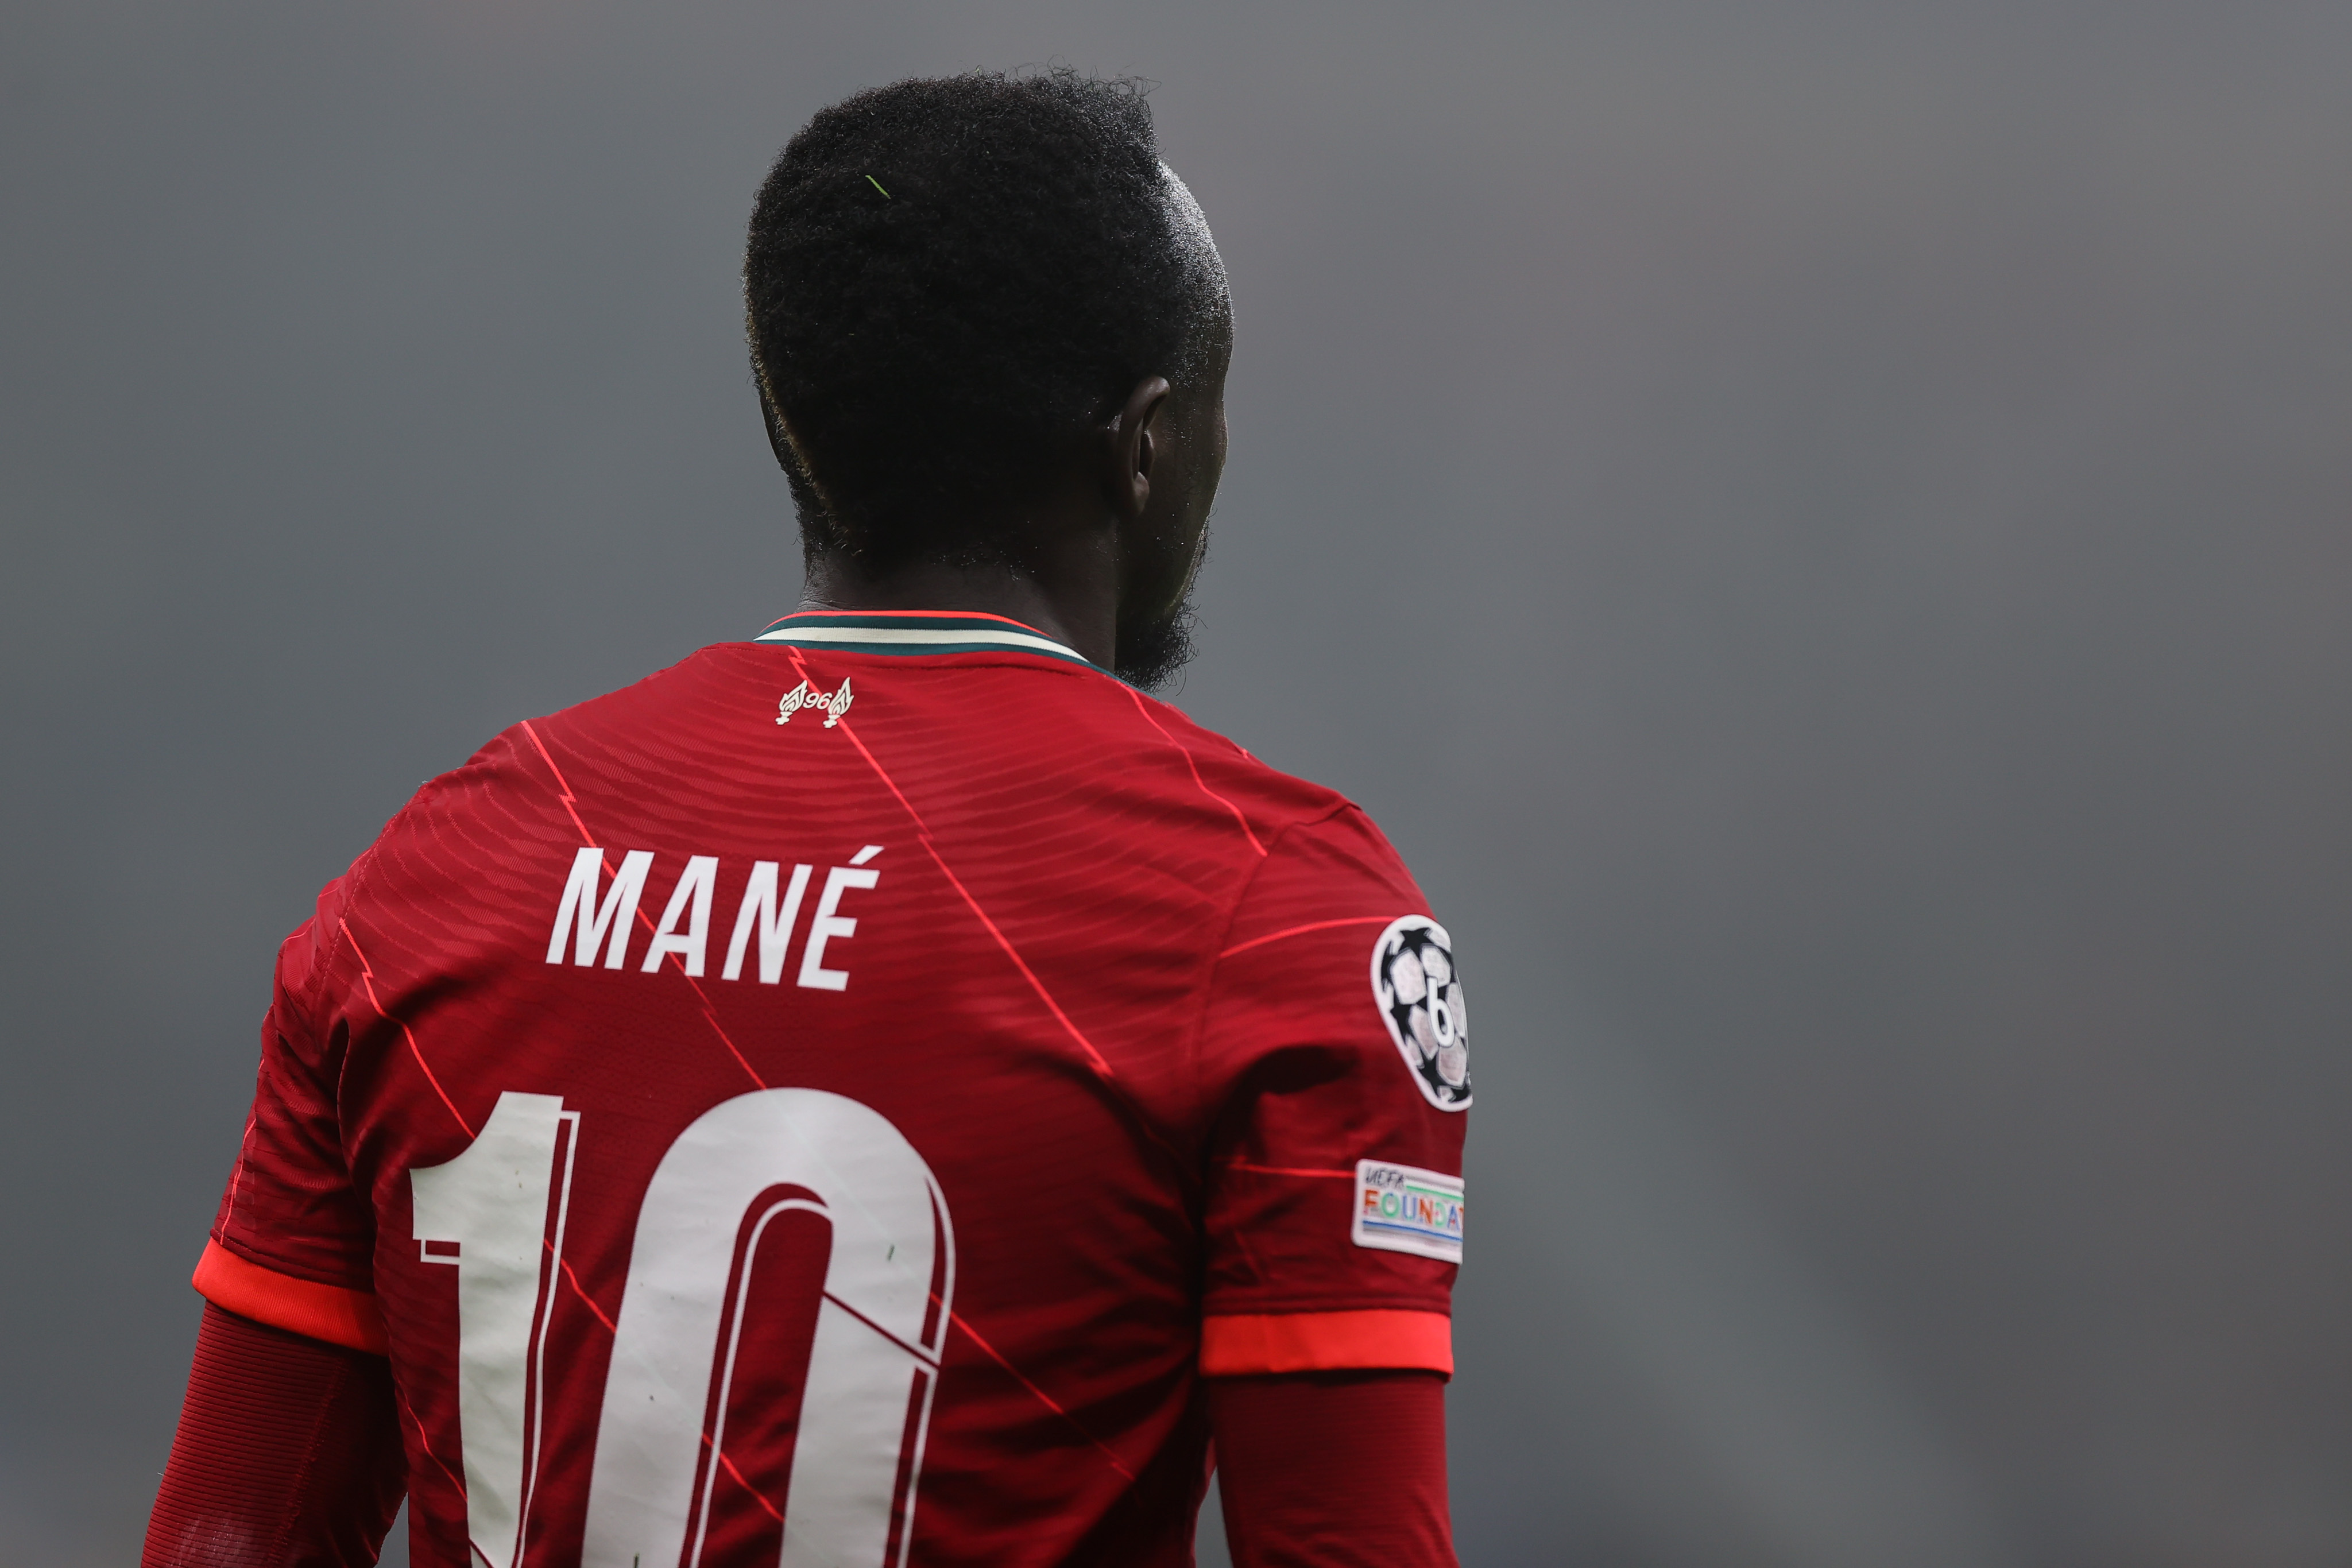 Liverpool confirm that Sadio Mane has signed for Bayern Munich for reported £35 million fee